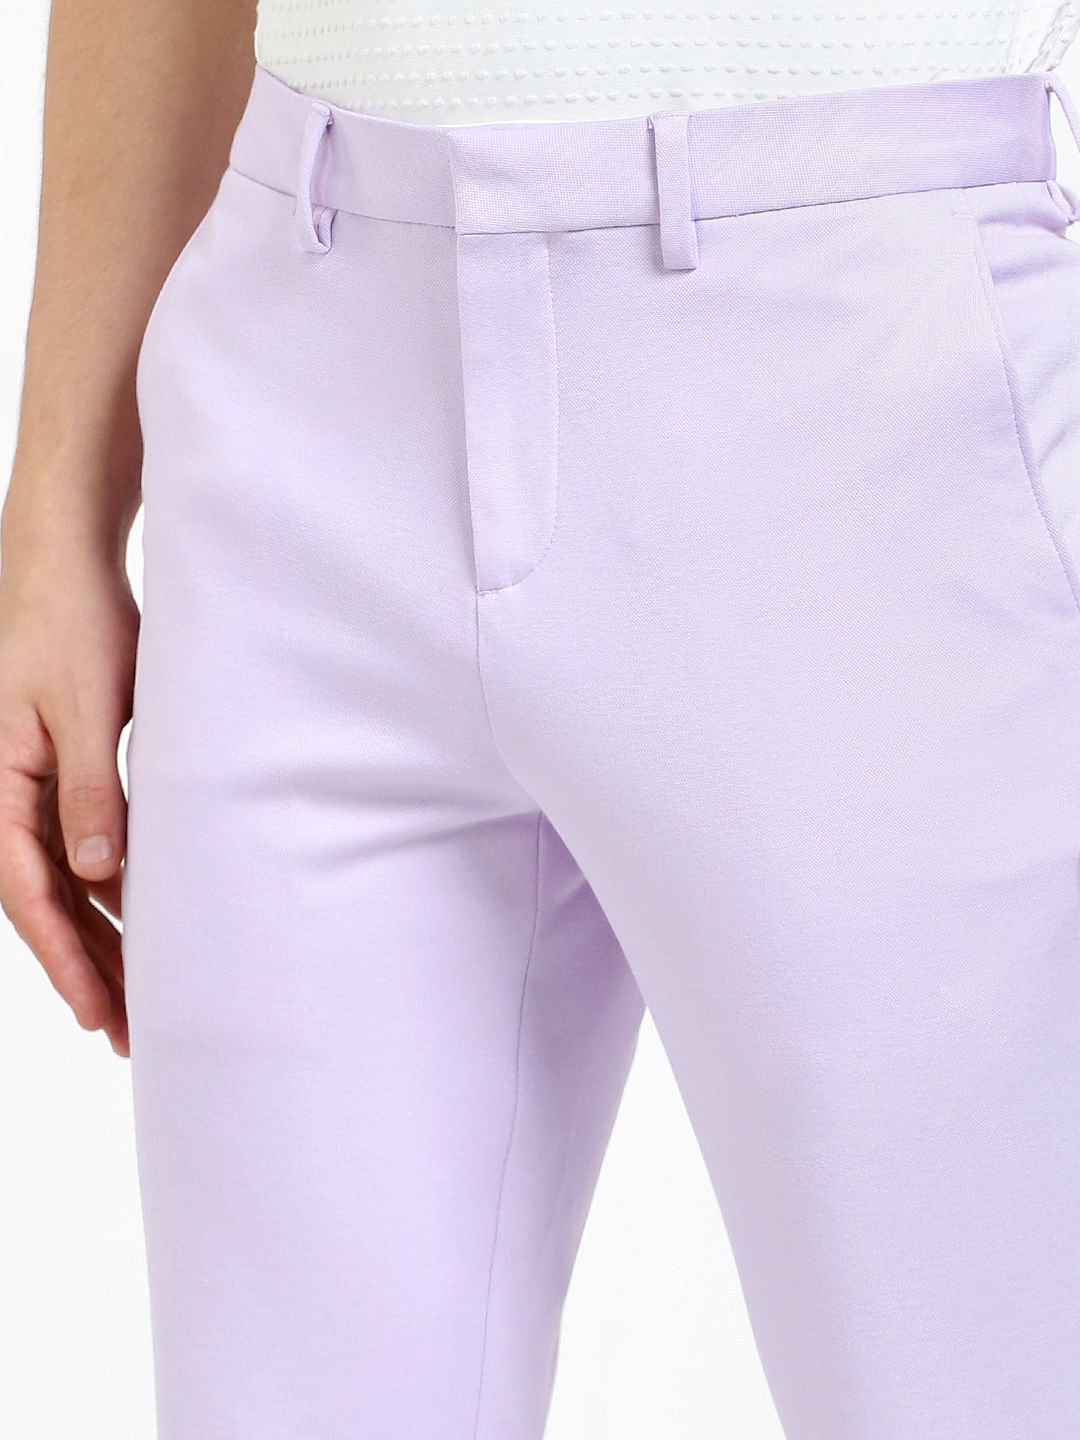 White Colour Plain Cotton Trouser Stylish And Designer With Front Pocket  Decoration Material Paint at Best Price in Delhi  A S Clothing